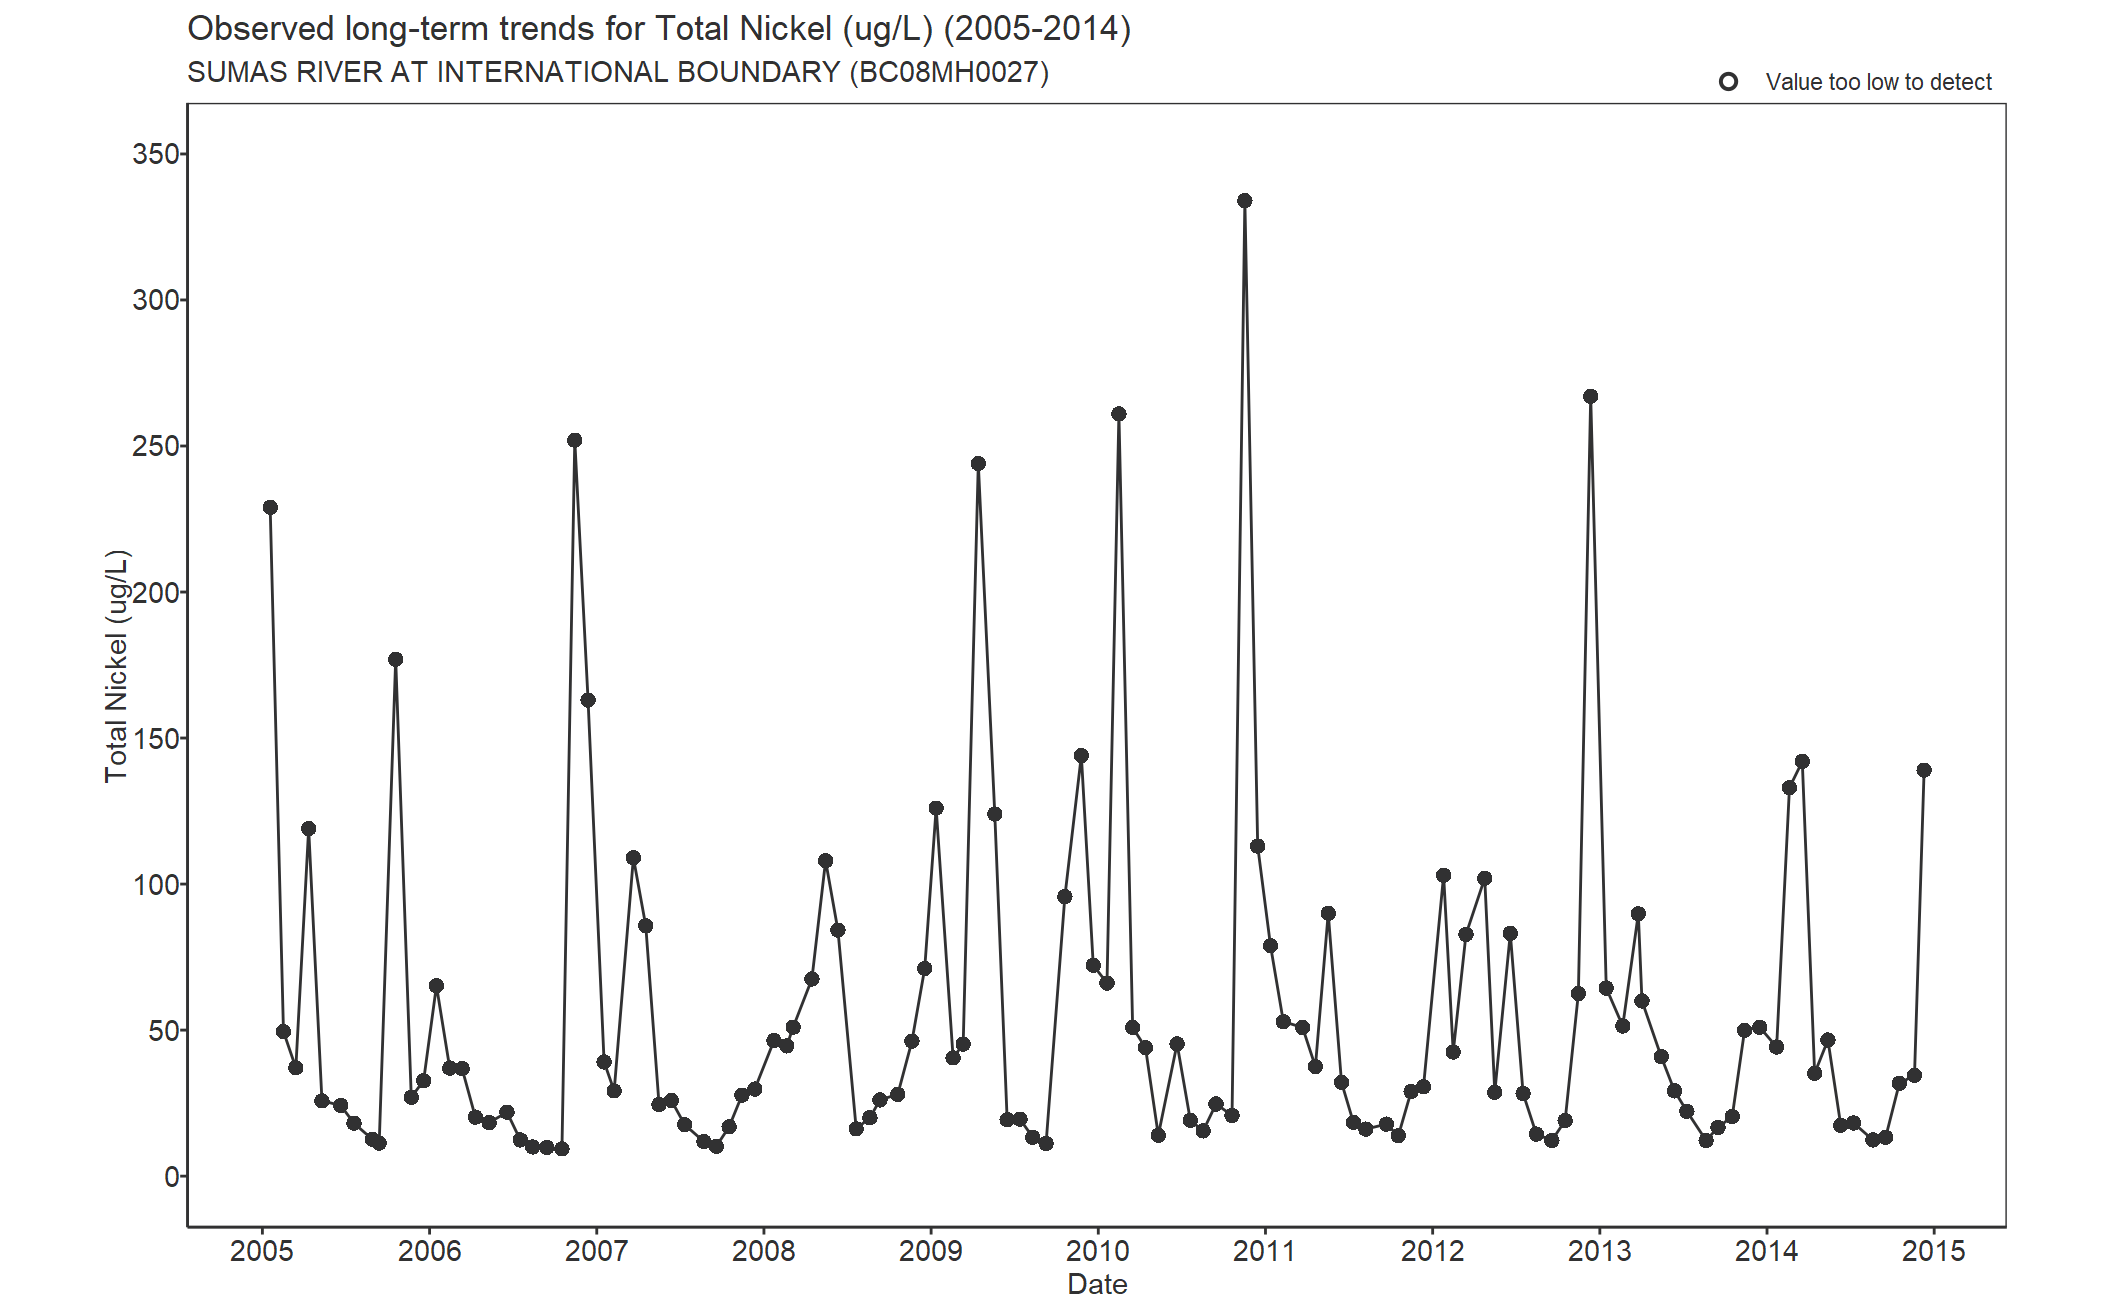 Observed long-term trends for Nickel Total (2005-2014)